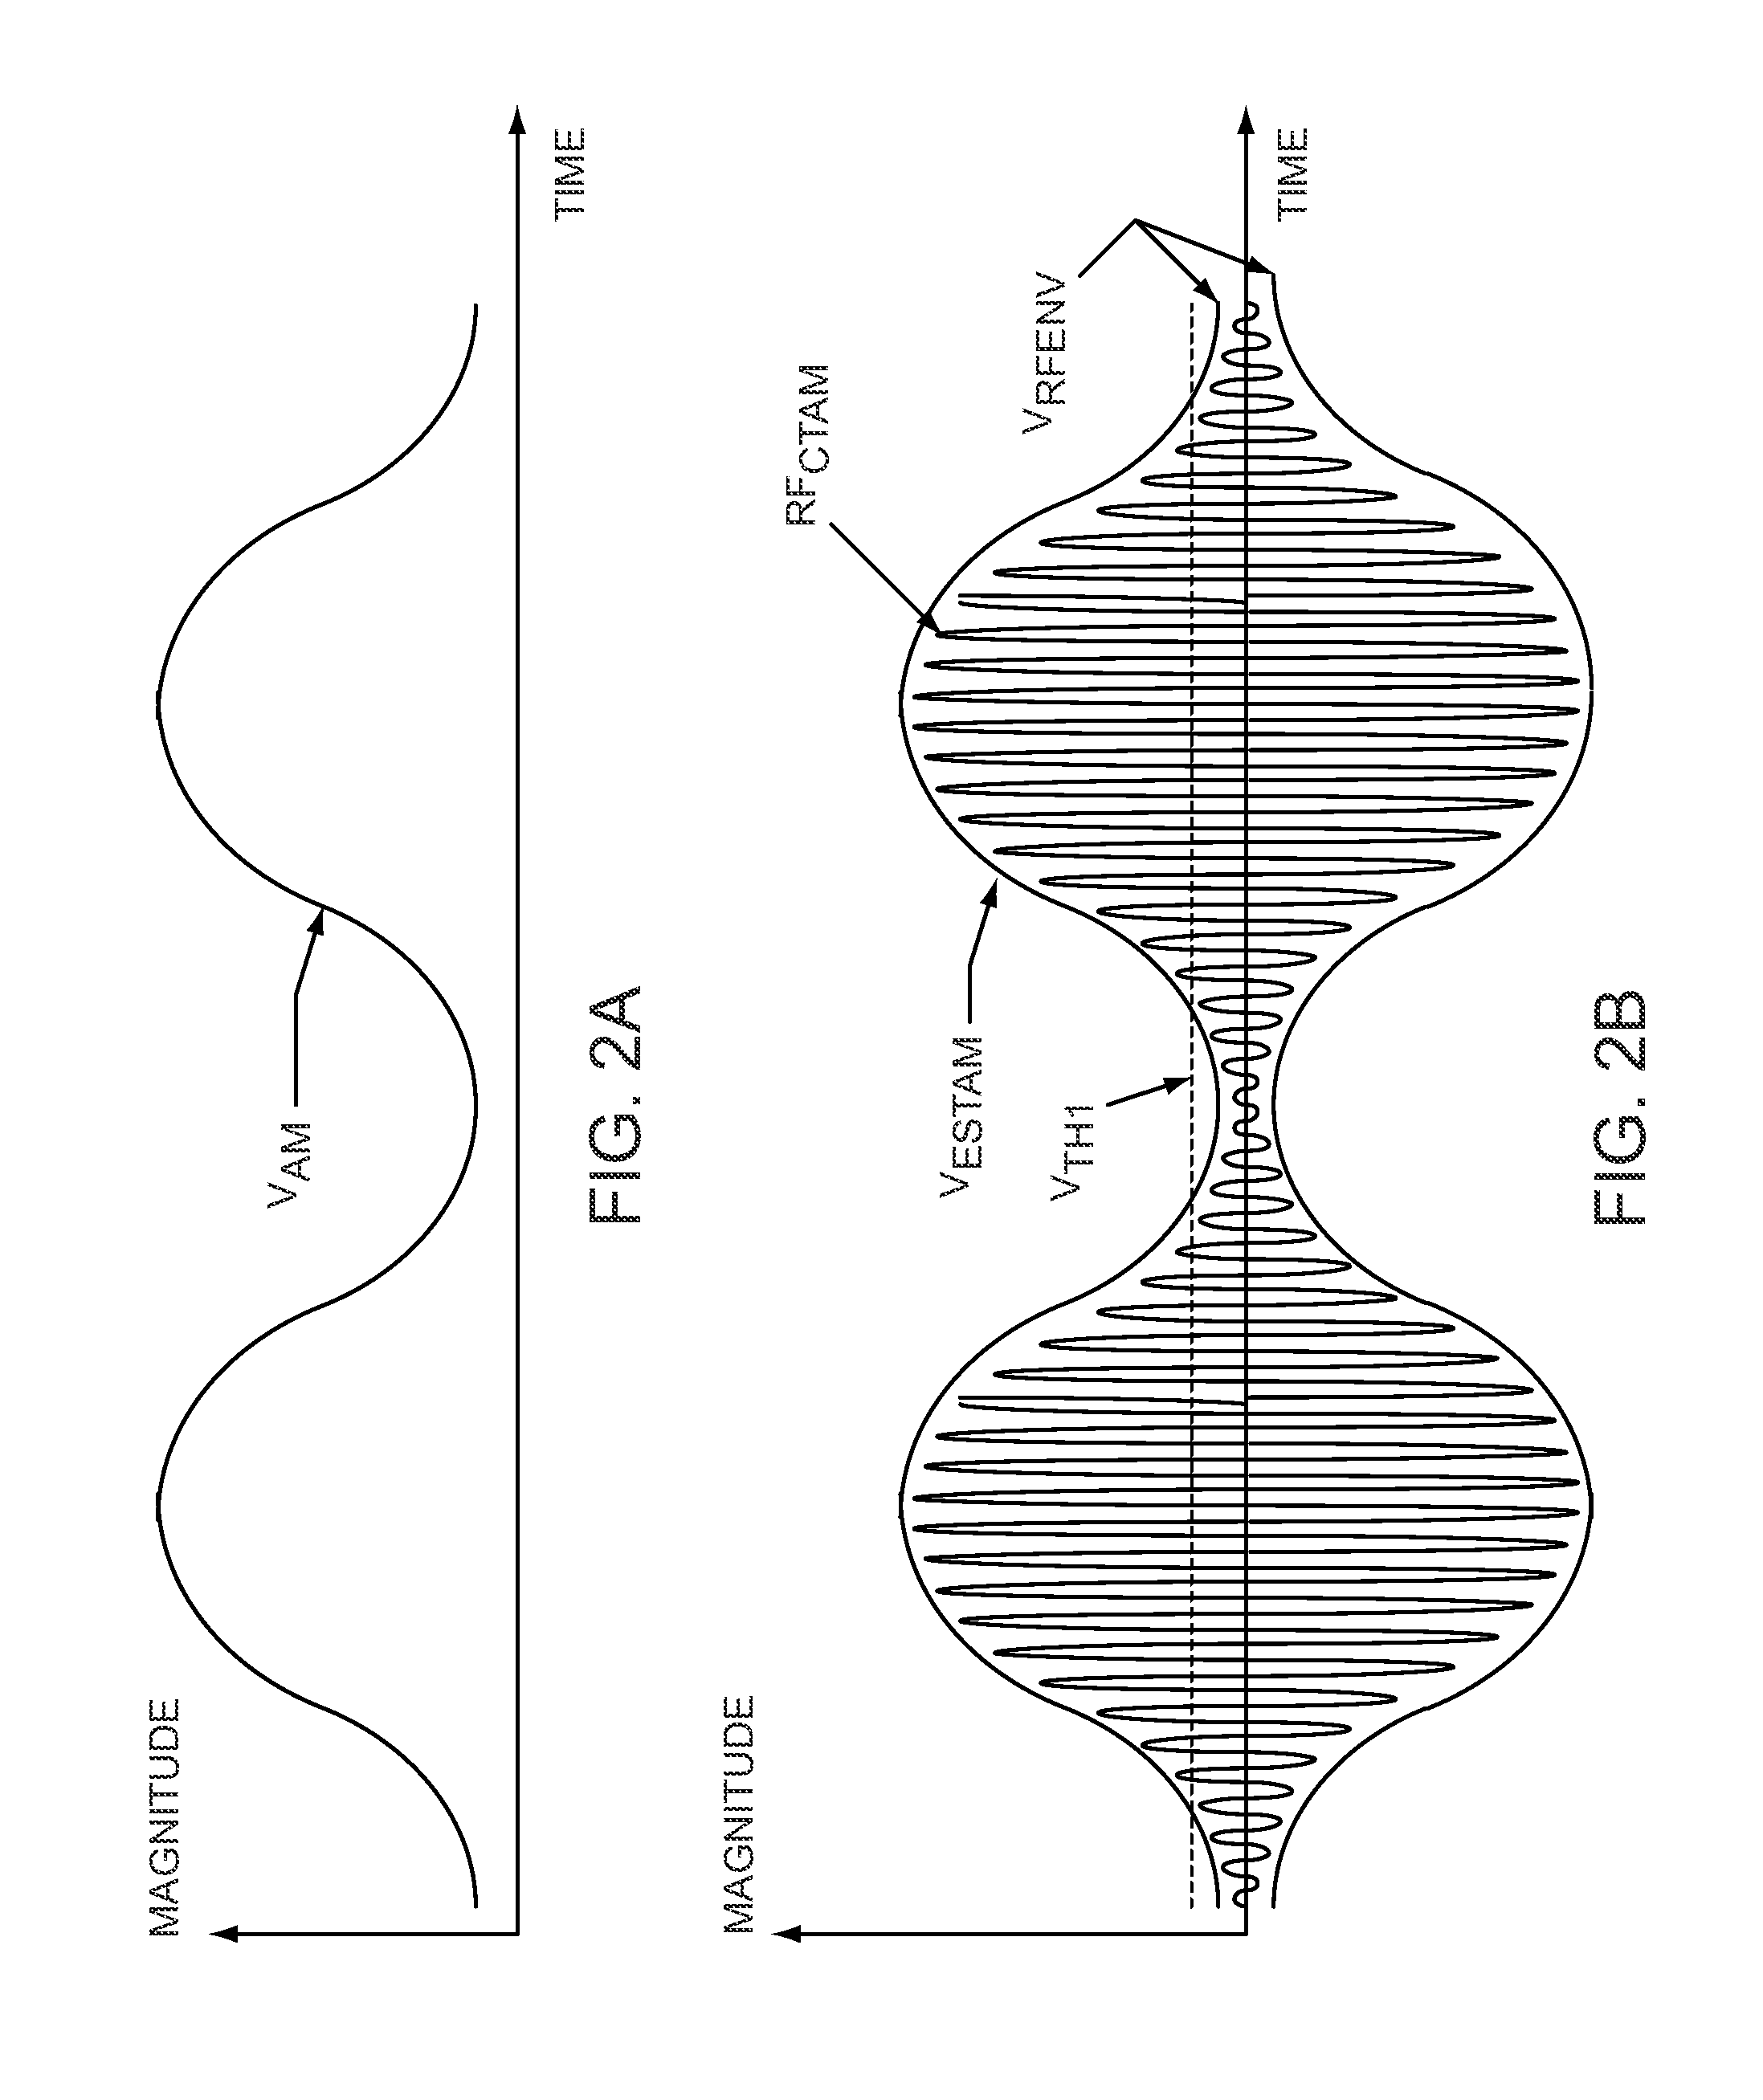 DC offset correction of a radio frequency receiver used with a continuous transmission radio frequency signal